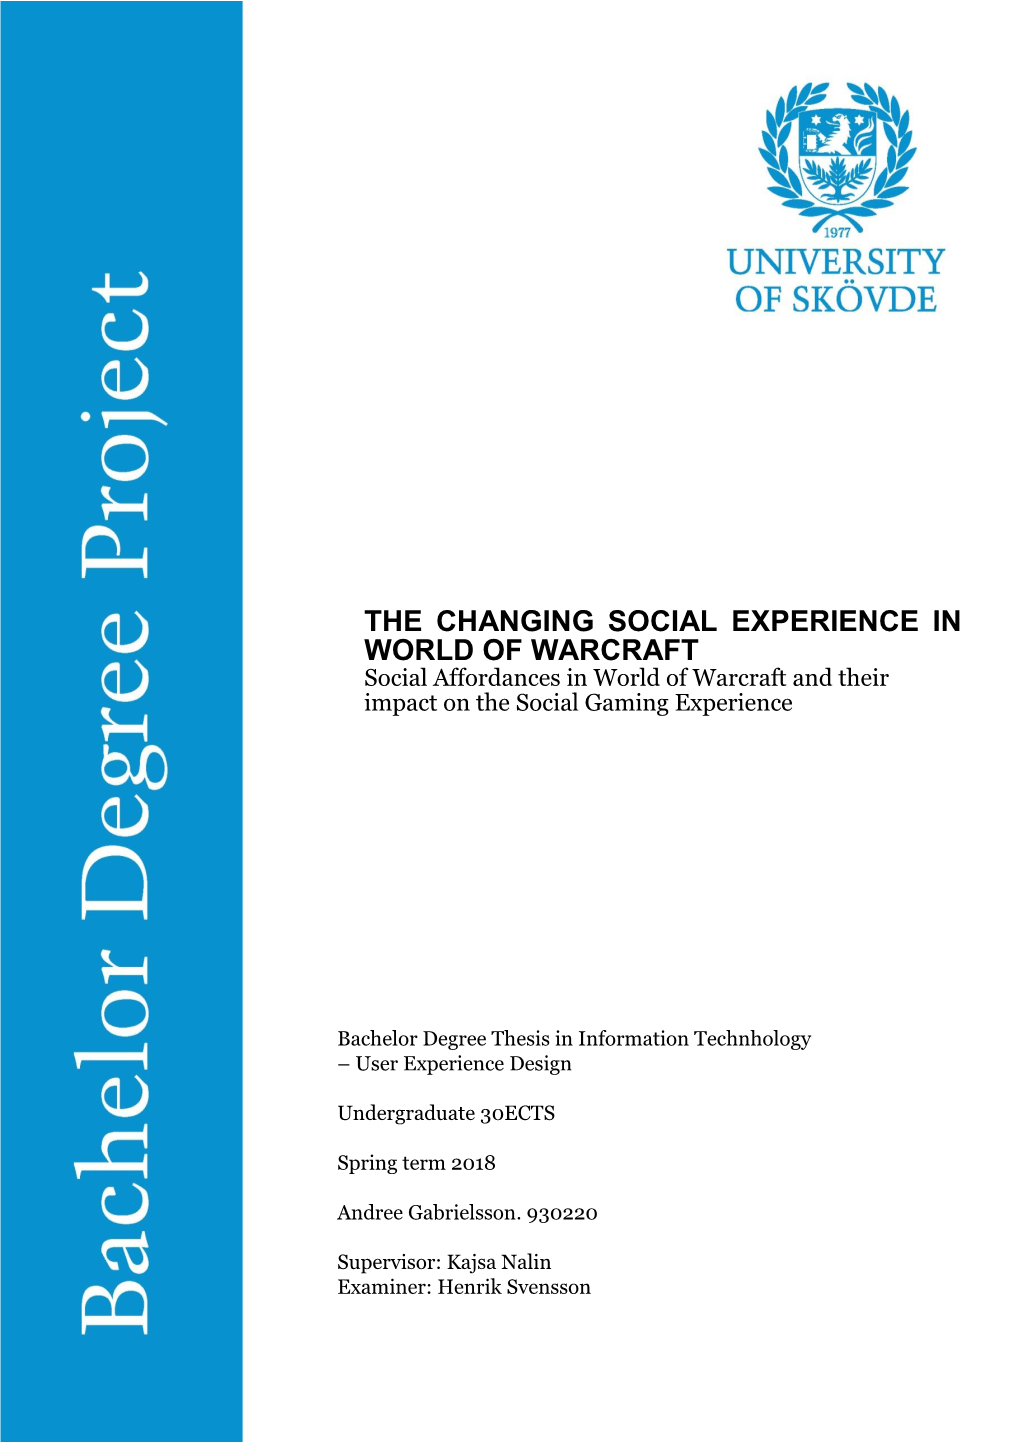 THE CHANGING SOCIAL EXPERIENCE in WORLD of WARCRAFT Social Affordances in World of Warcraft and Their Impact on the Social Gaming Experience